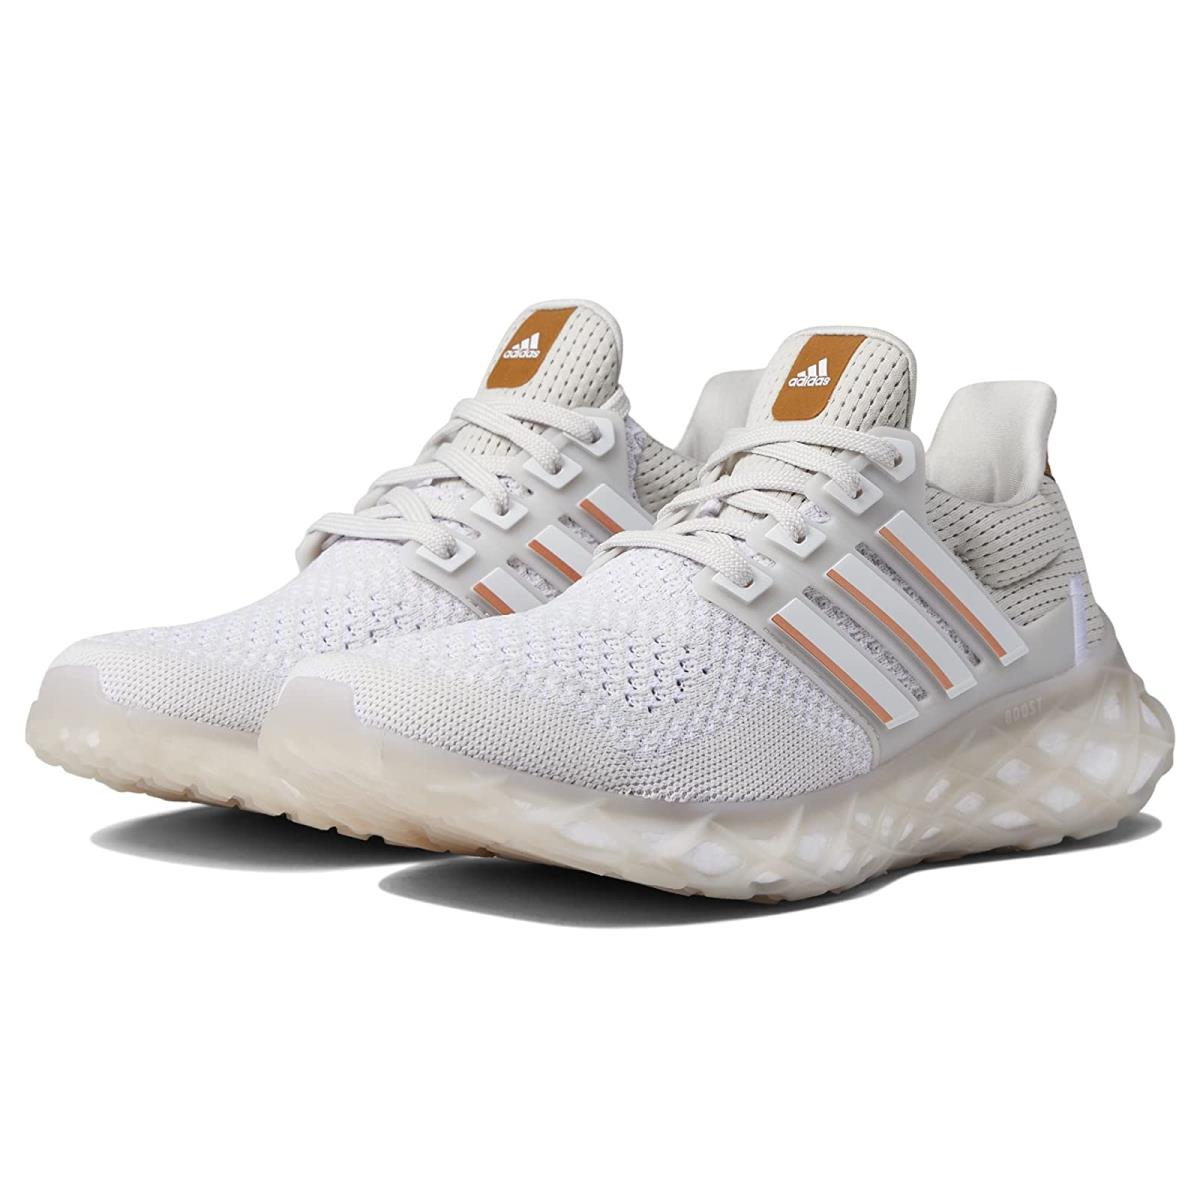 Woman`s Sneakers Athletic Shoes Adidas Running Ultraboost Web Alphaskin Grey One/White/Copper Metallic